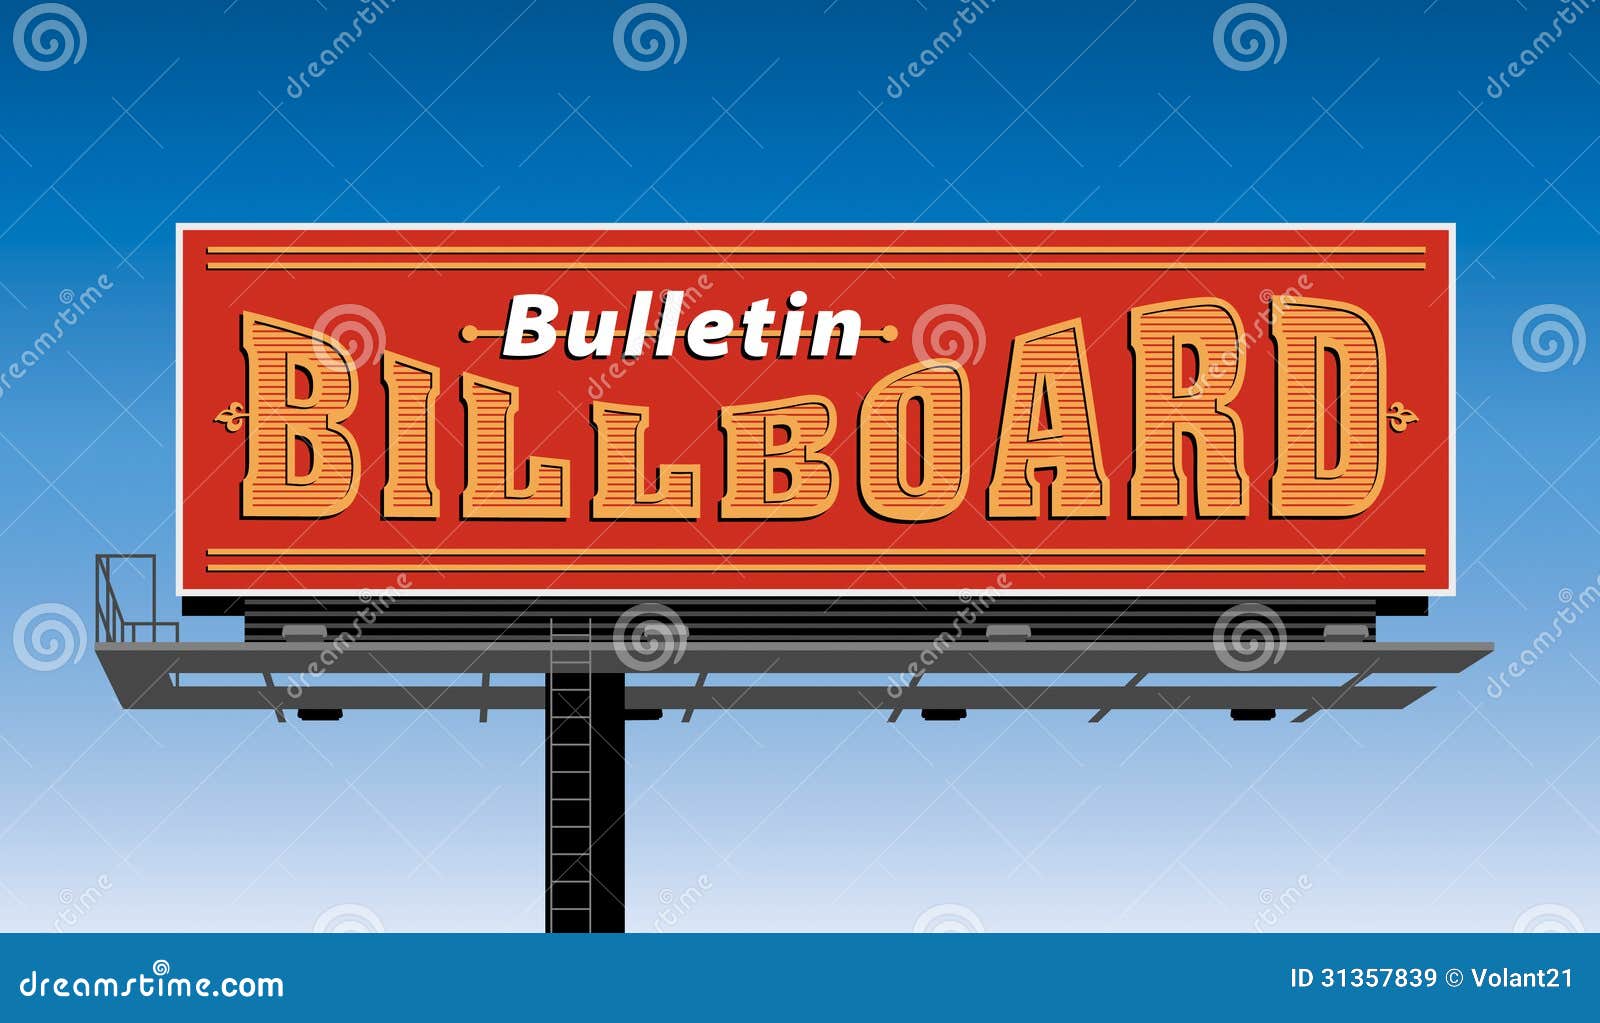 How to Start Your Own Billboard Advertising Company